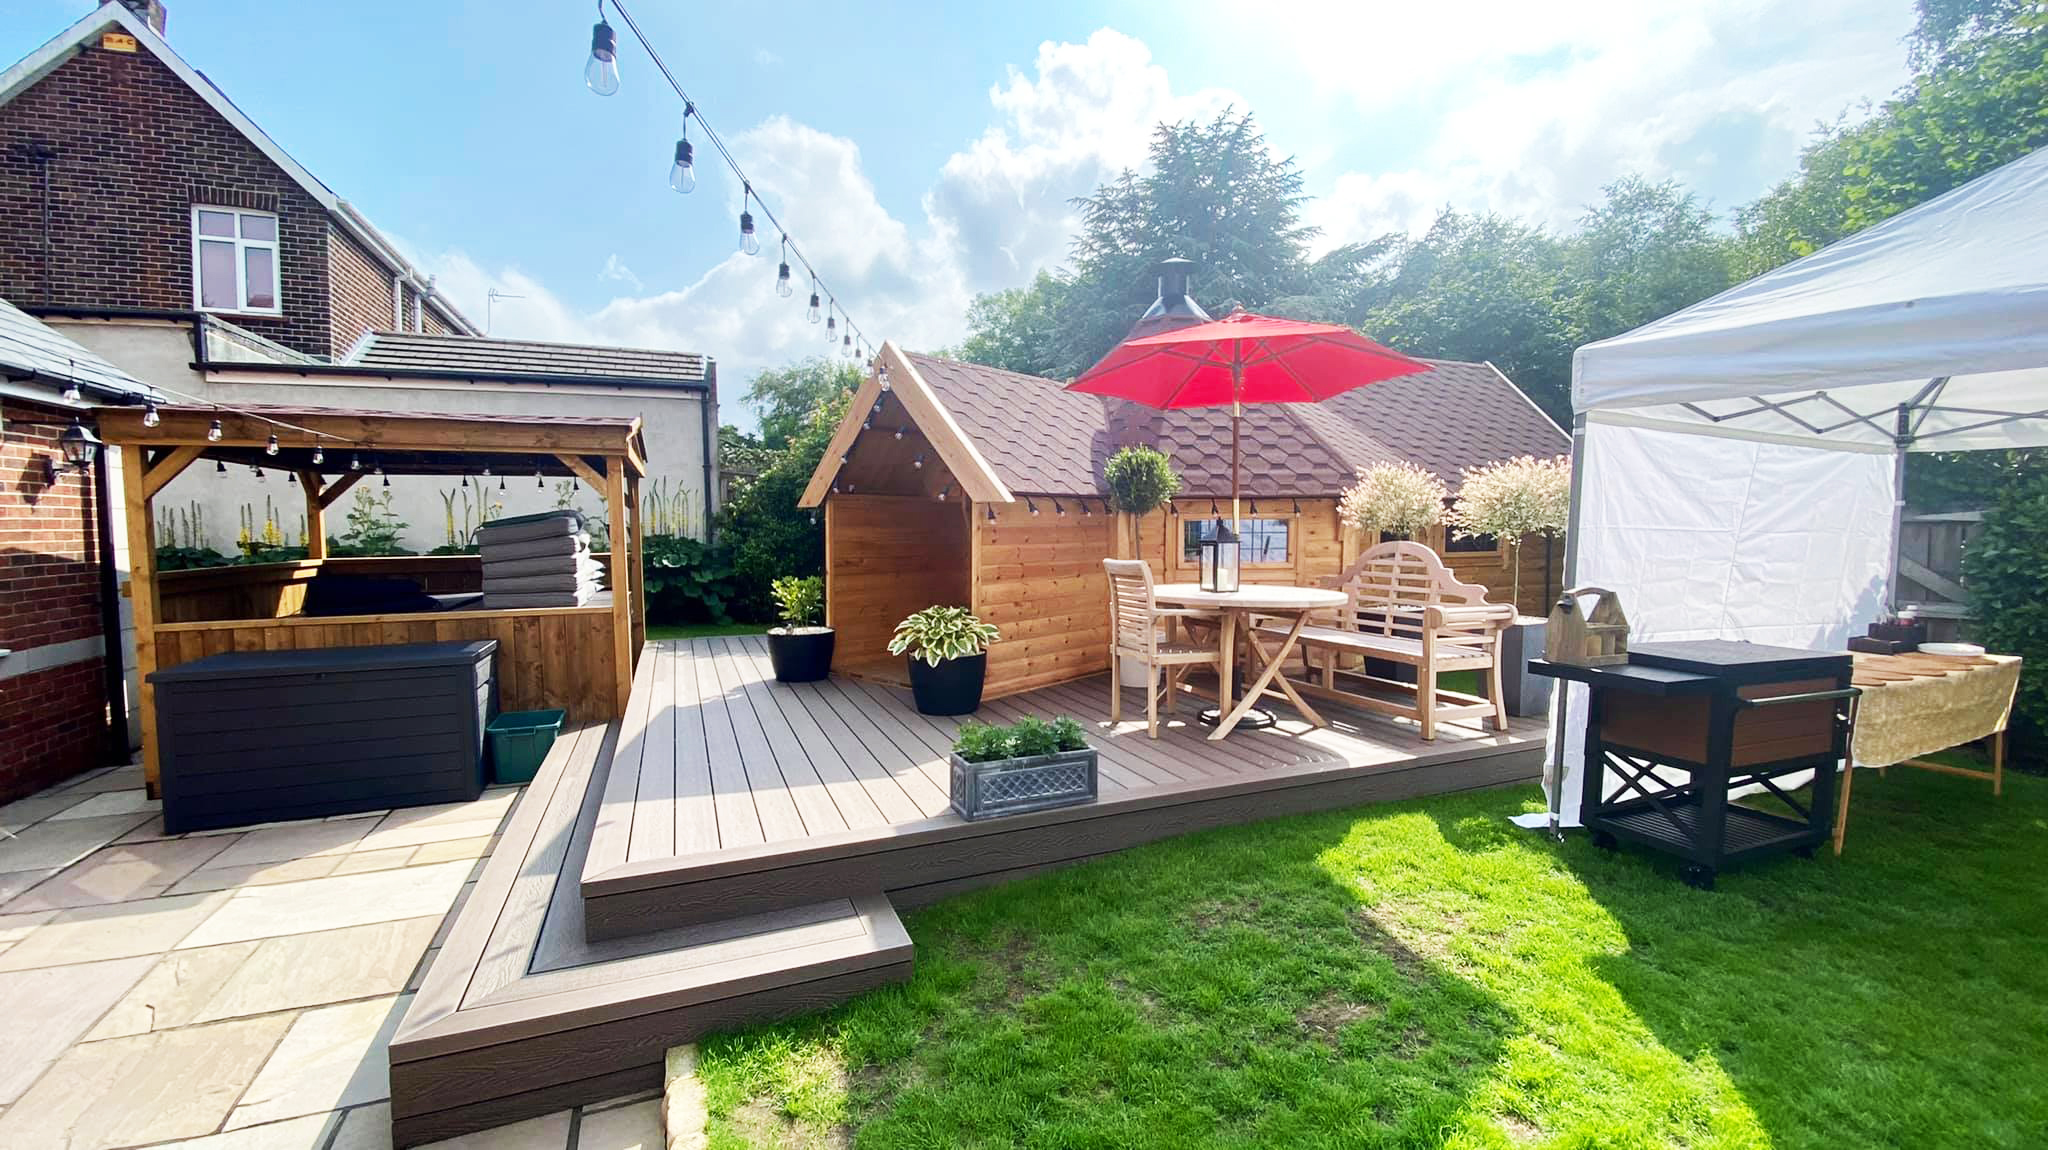 External shot of a BBQ cabin bar on decked area with hanging festoon lights and red parasol